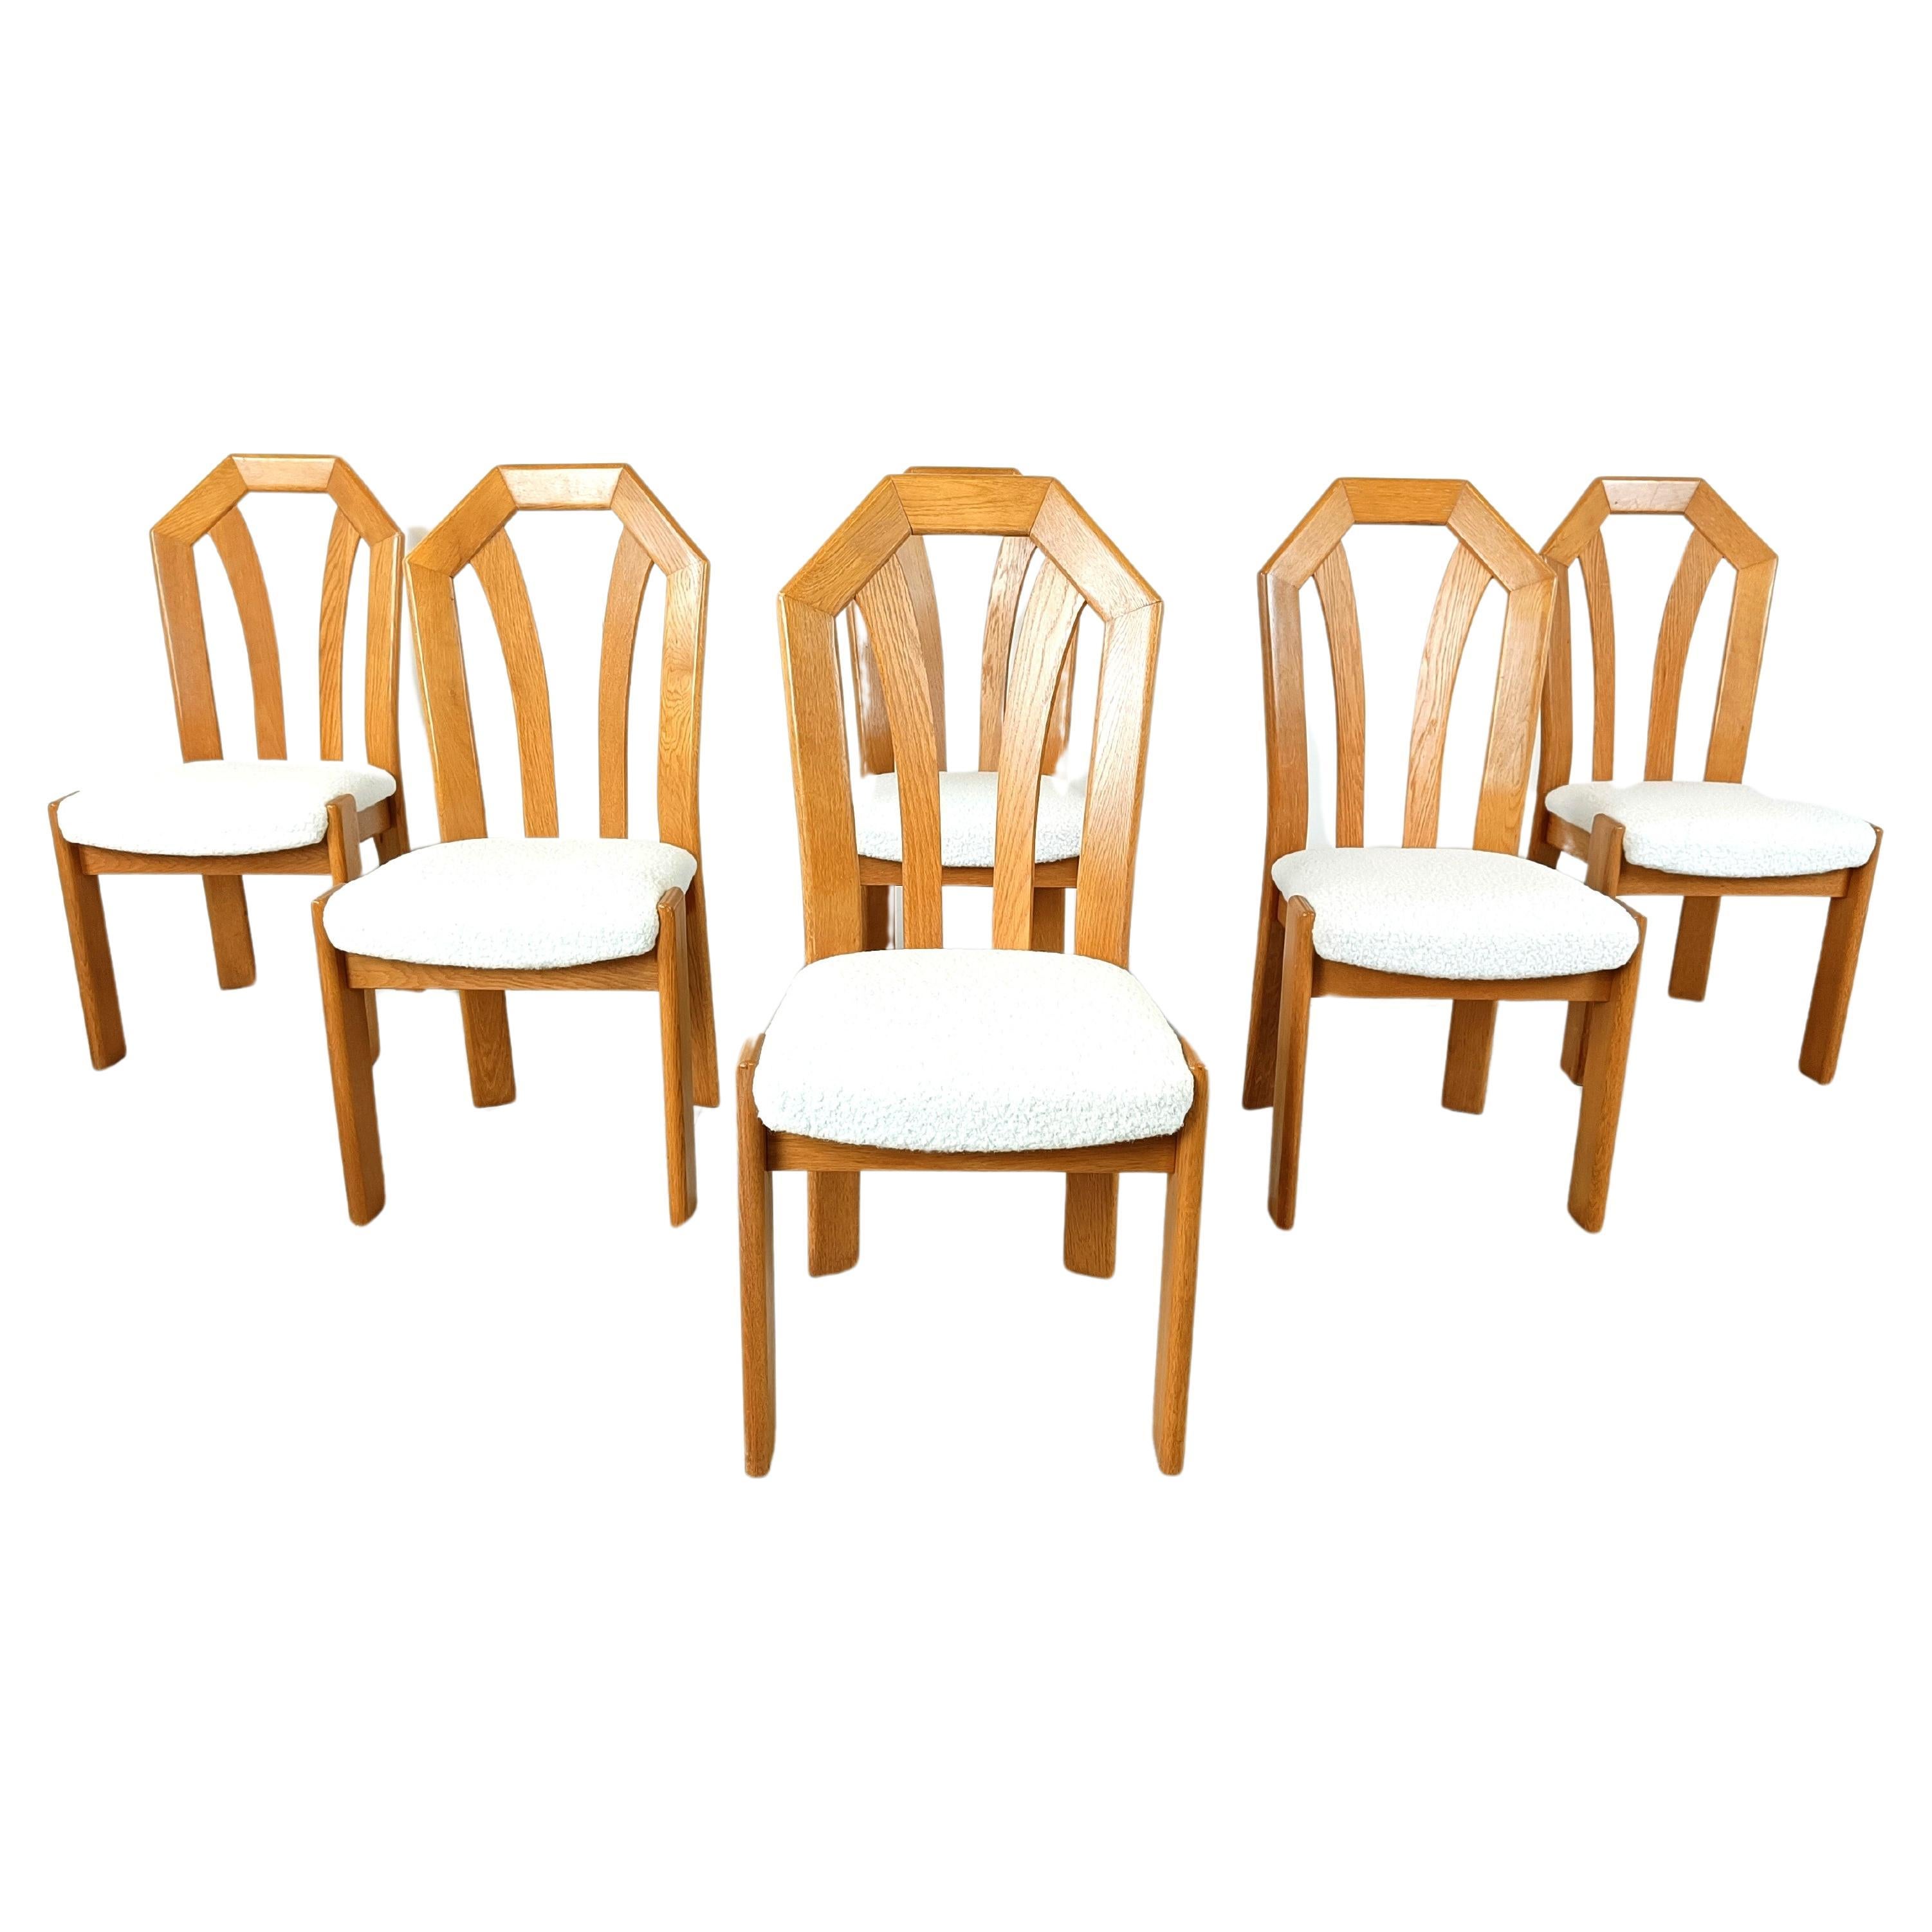 Set of 6 brutalist oak dining chairs, 1970s